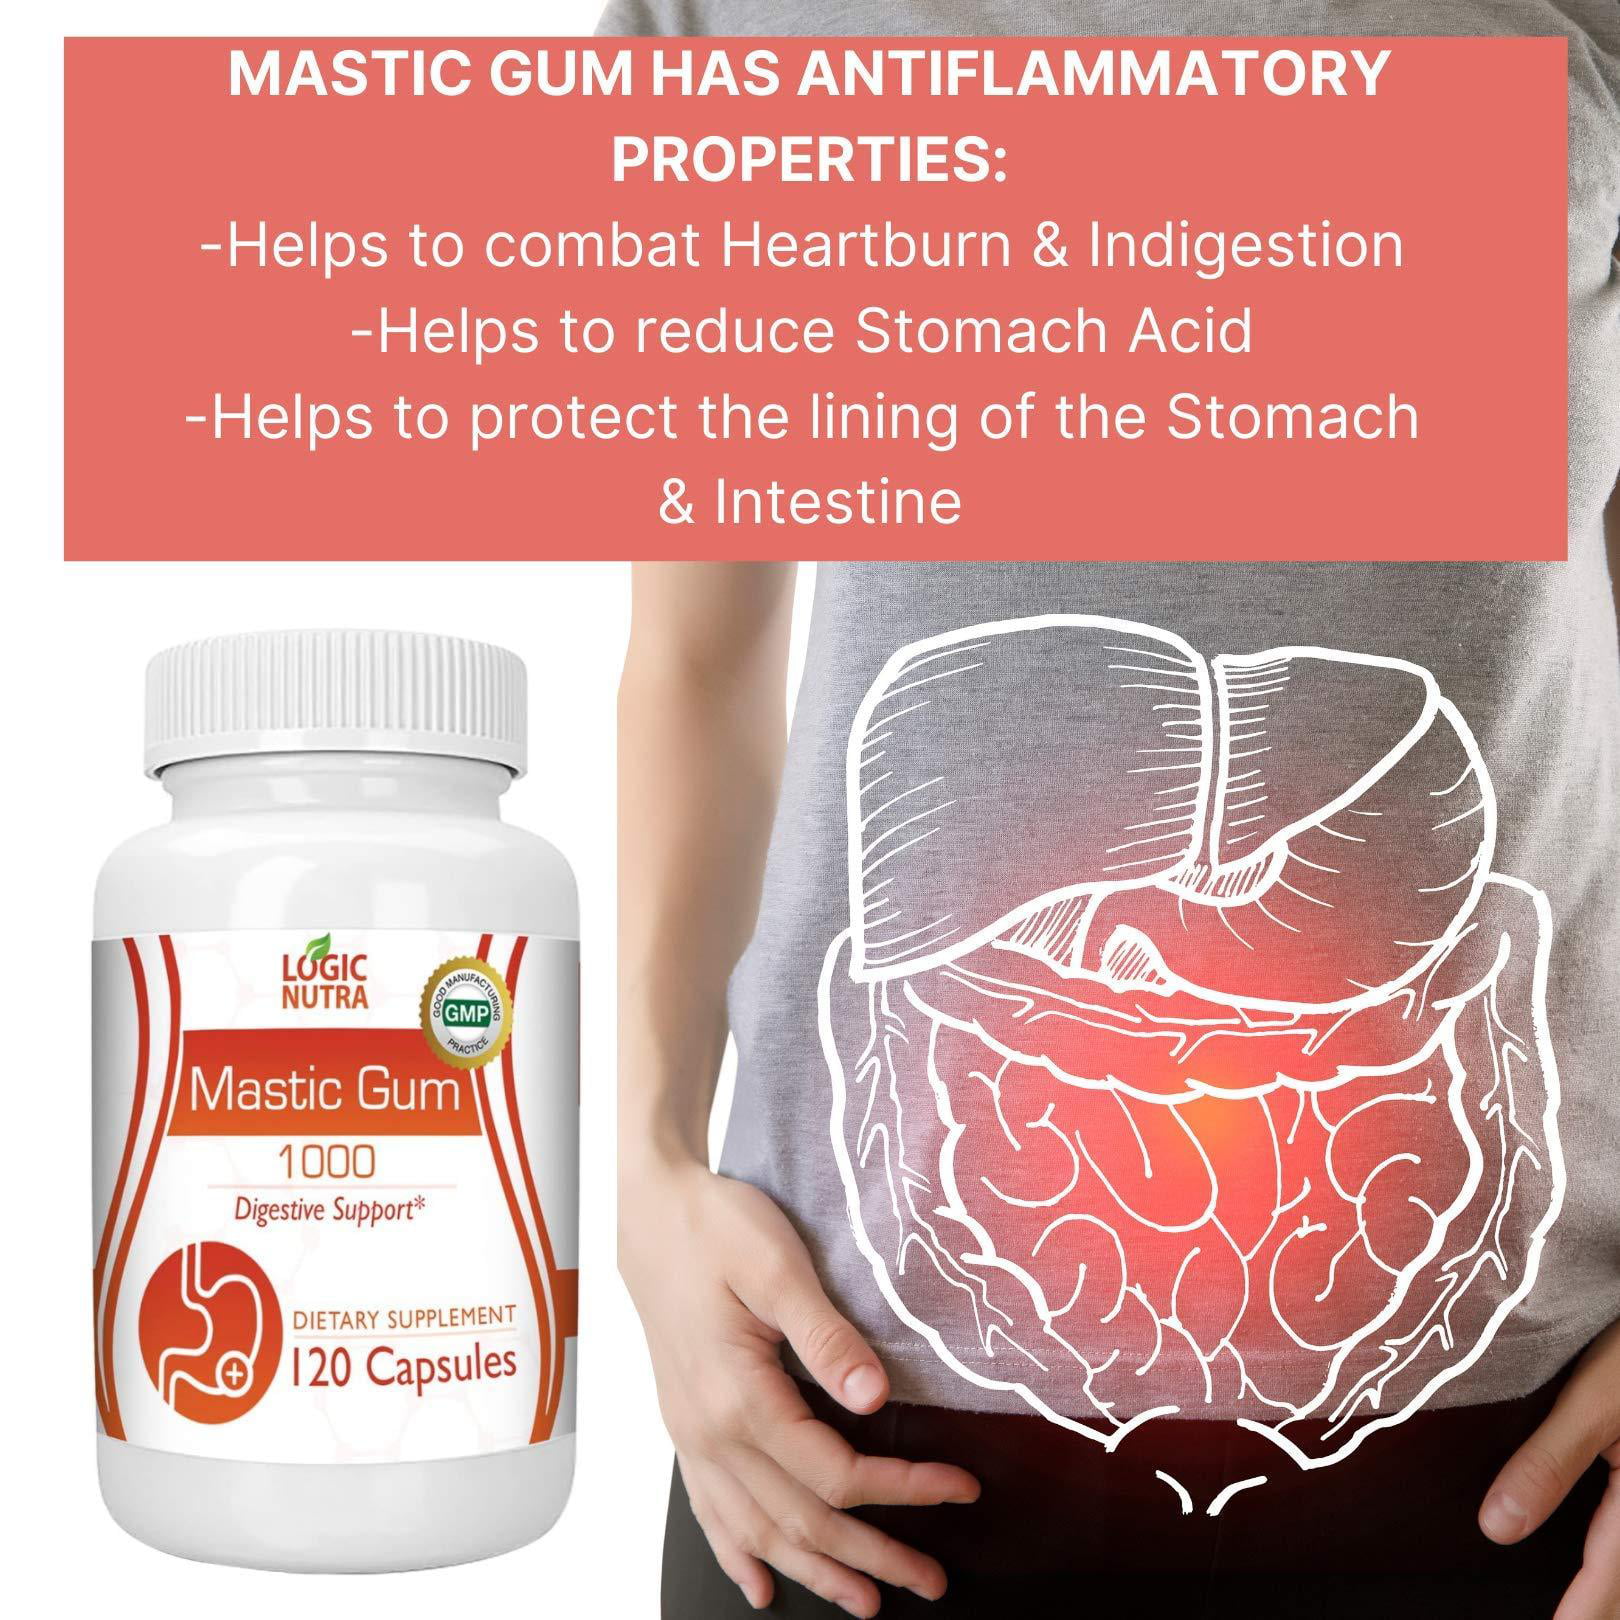 Mastic Gum: A Natural Supplement For Stomach Ulcers